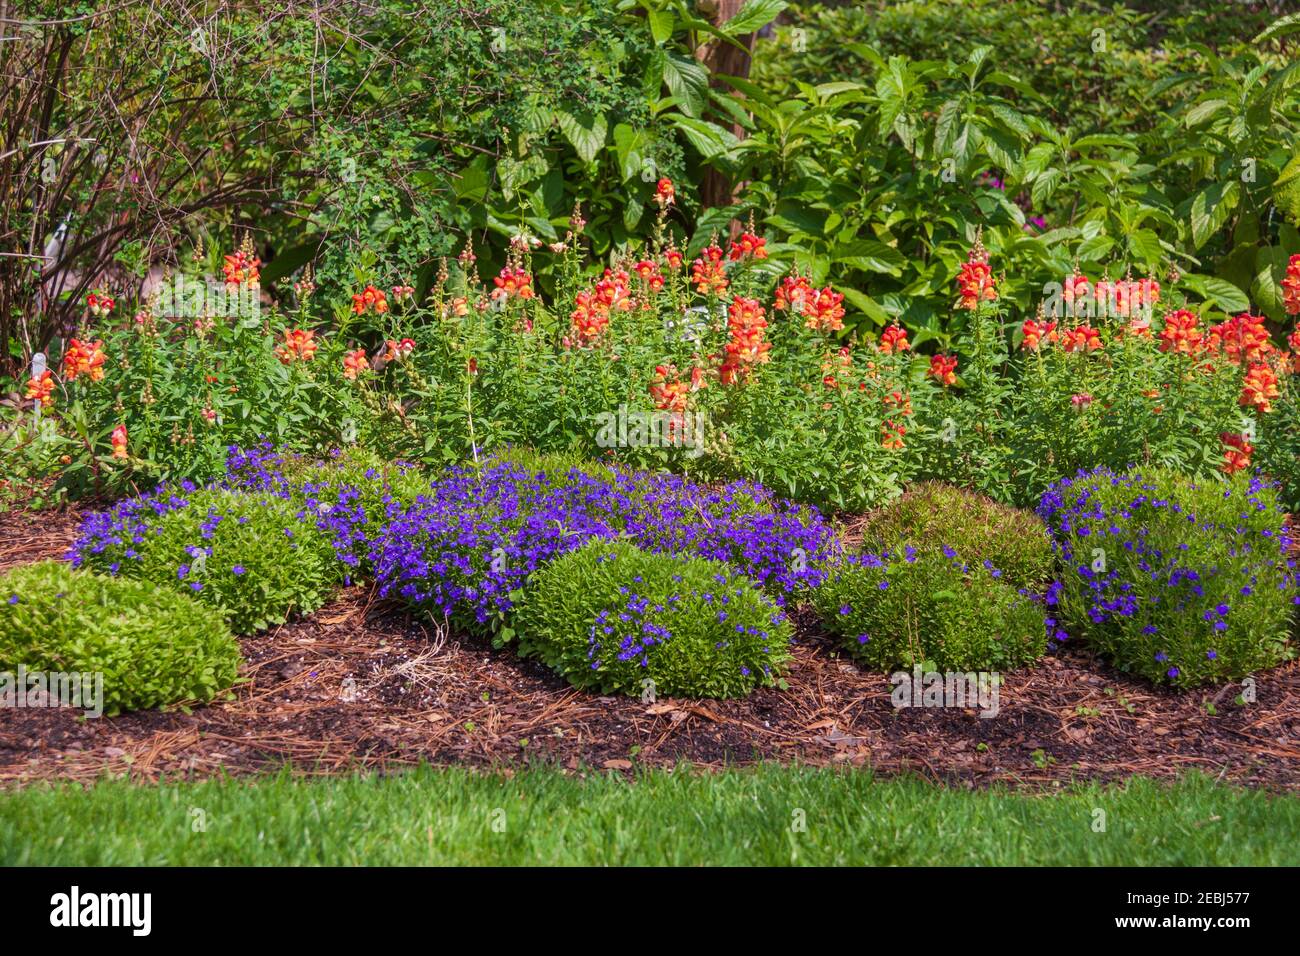 Garden Scene, with Snapdragons, California Poppies, and Edging Lobelia, at Mercer Arboretum and Botanical Gardens in Spring, Texas. Stock Photo